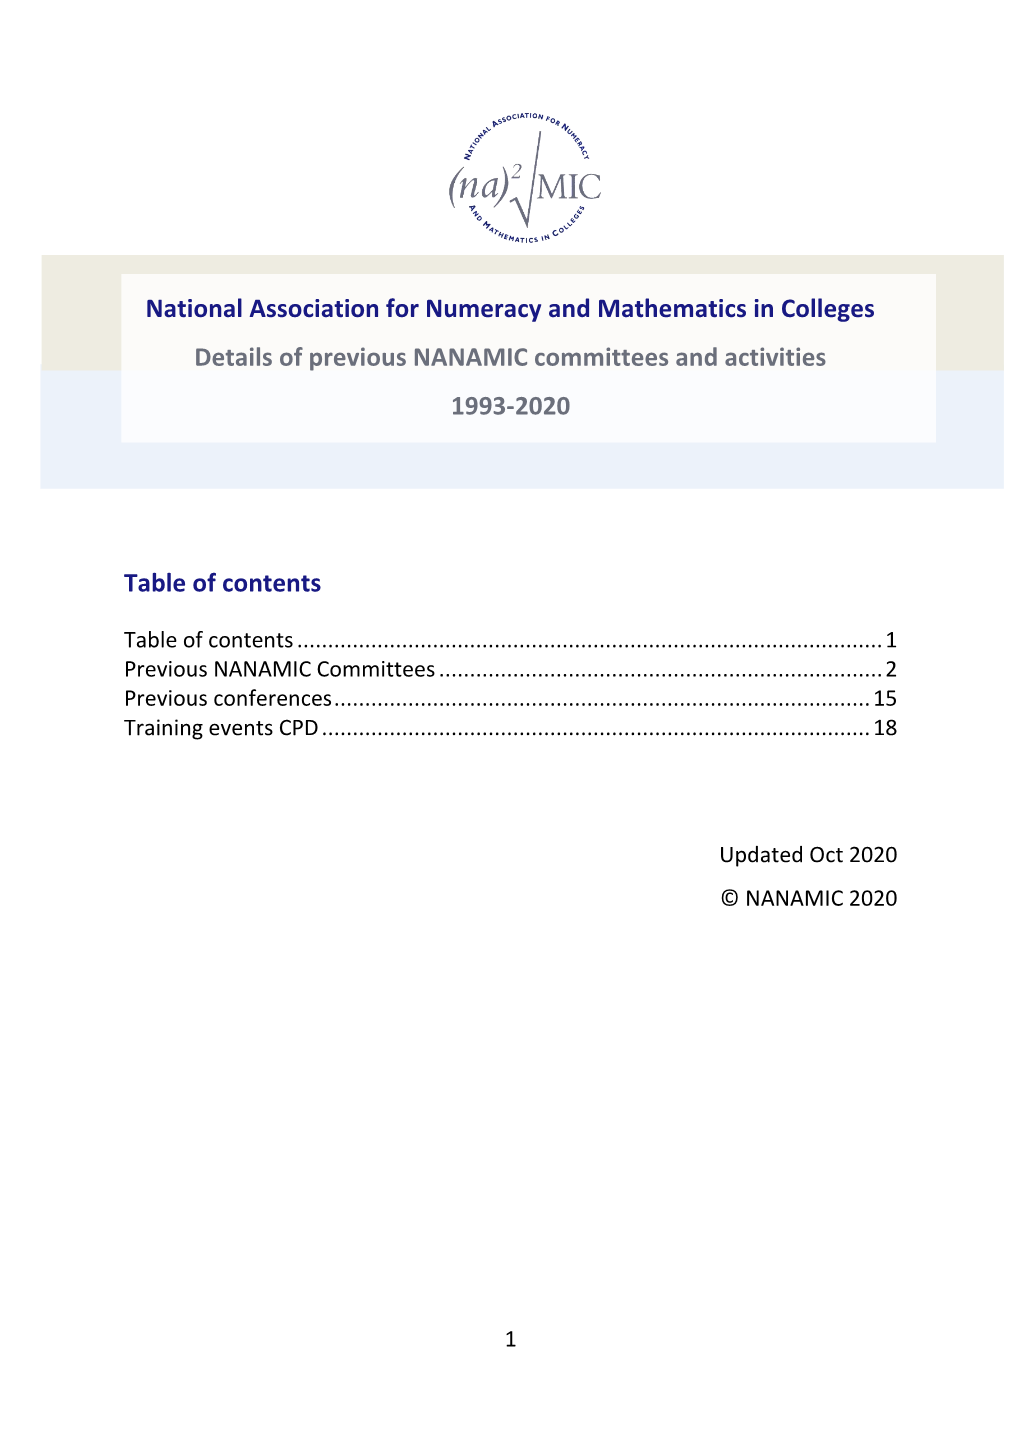 National Association for Numeracy and Mathematics in Colleges Details of Previous NANAMIC Committees and Activities 1993-2020